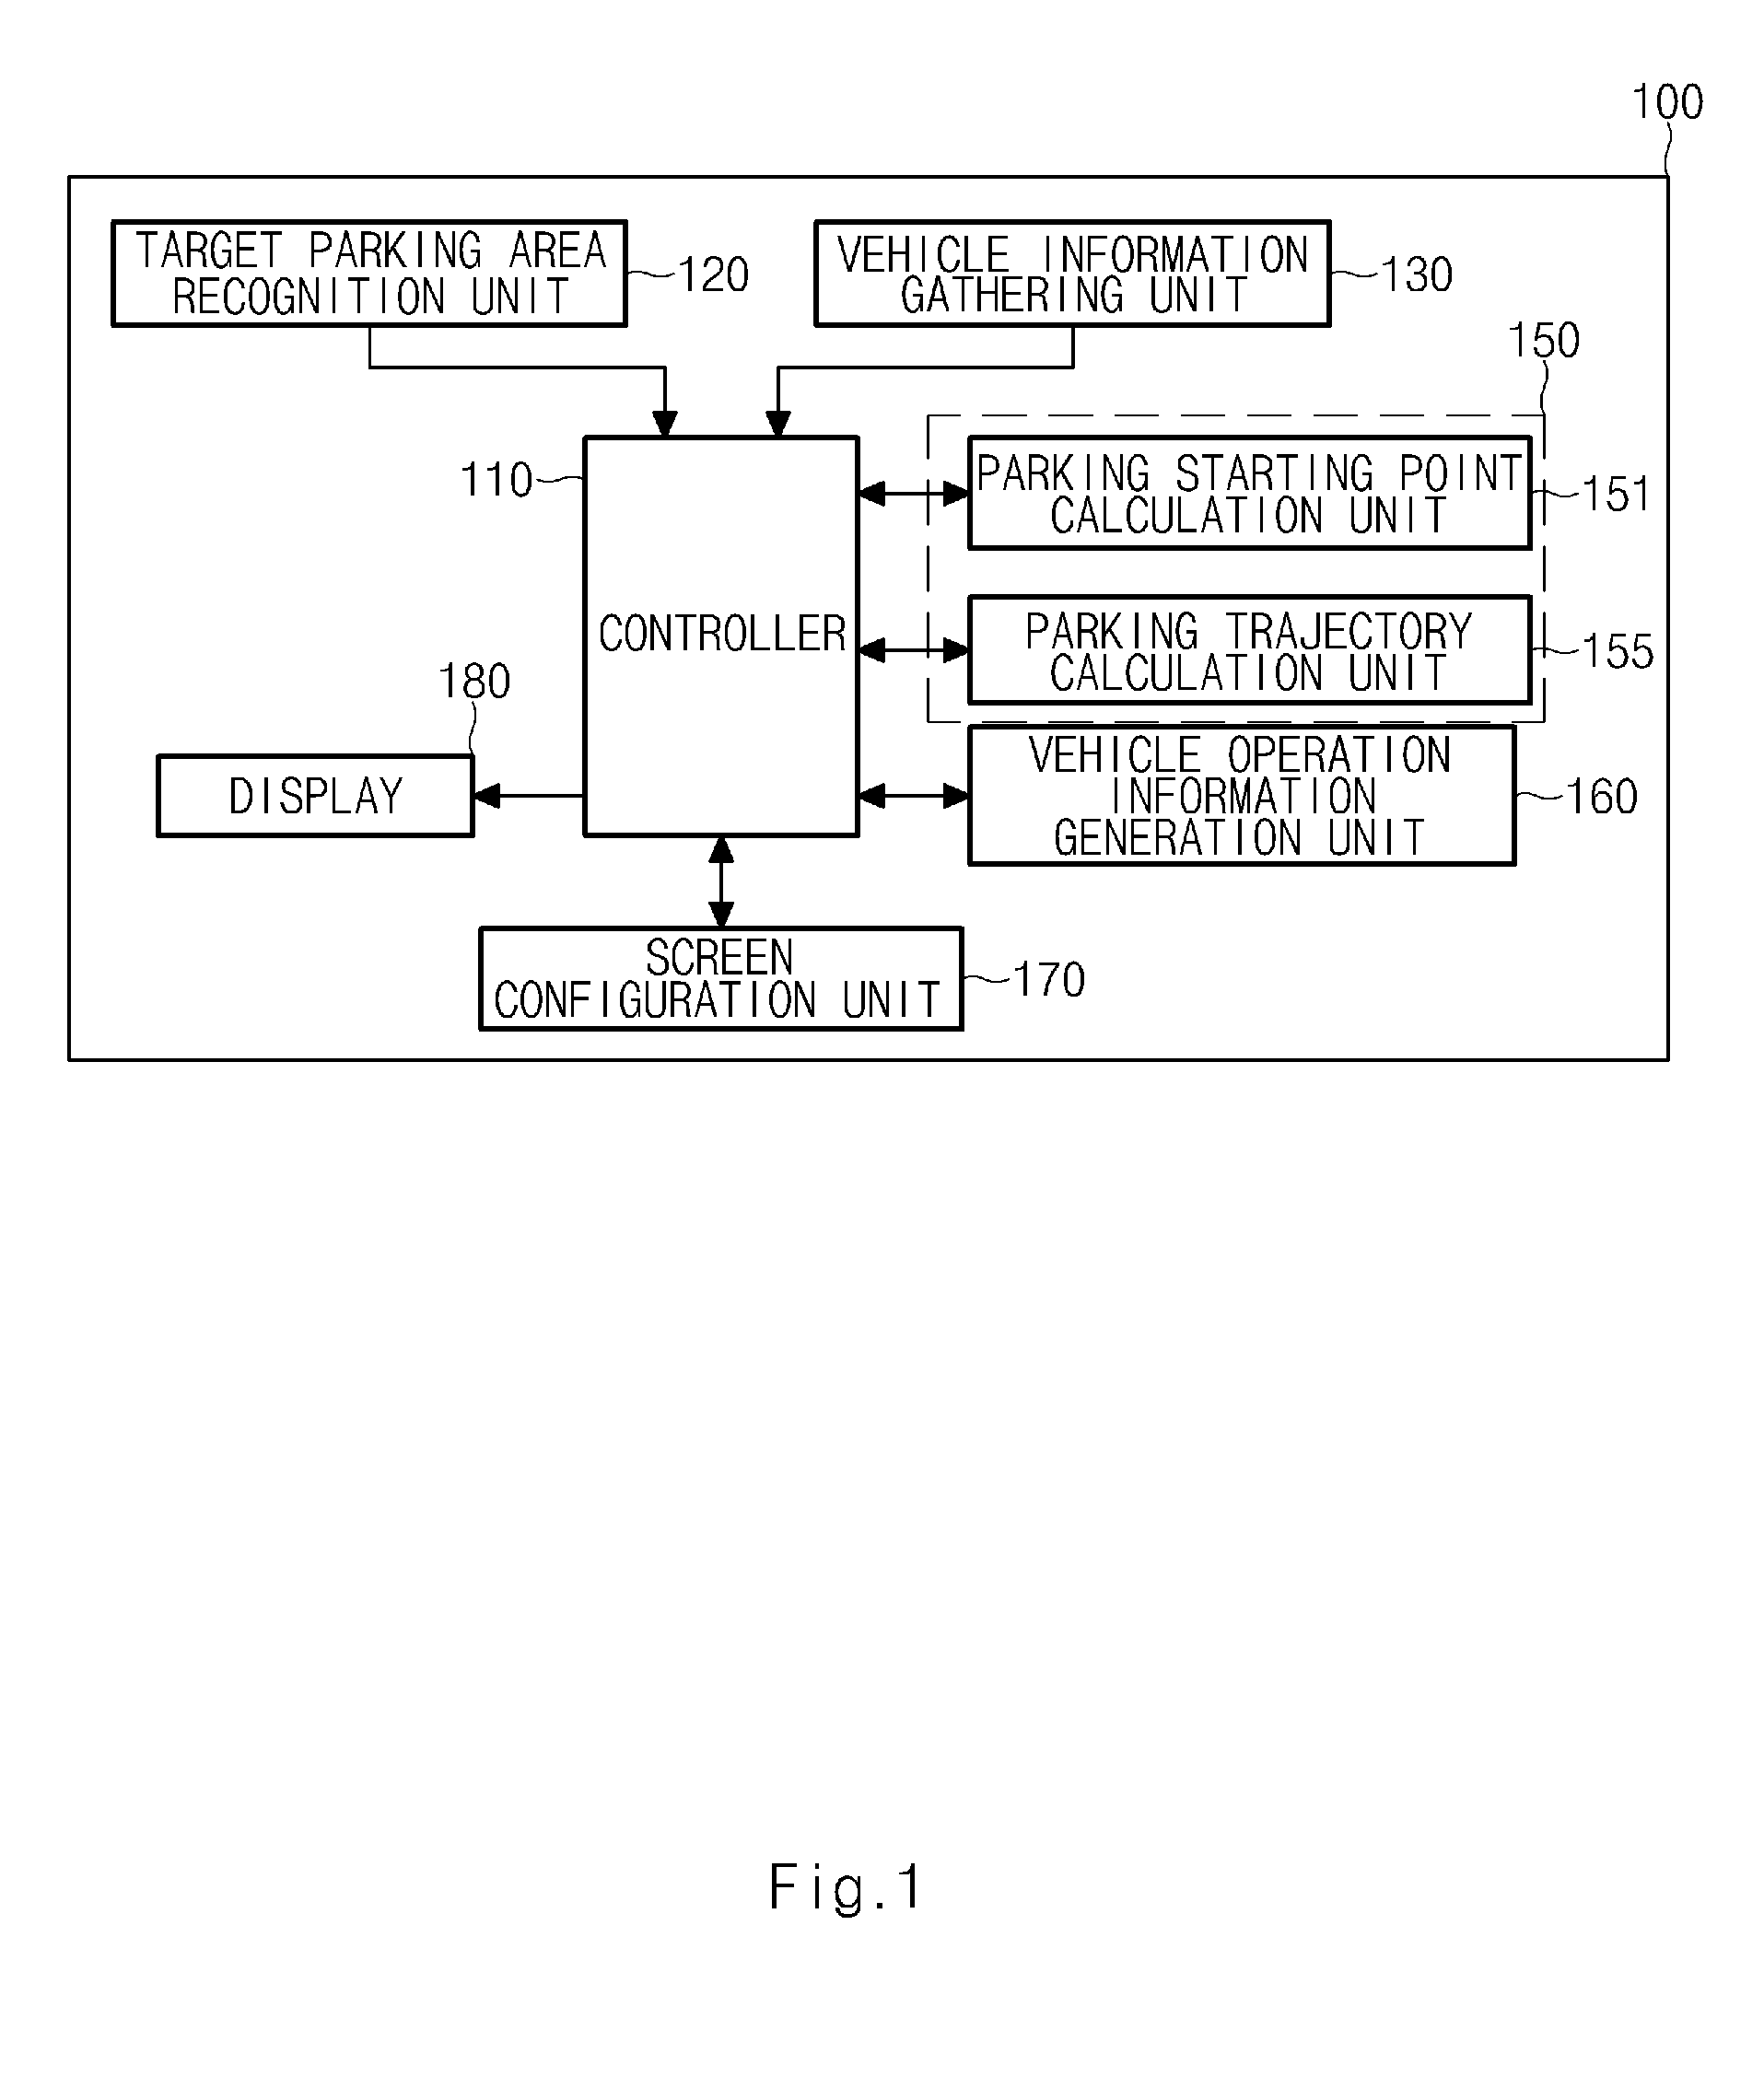 Apparatus and method for guiding parking